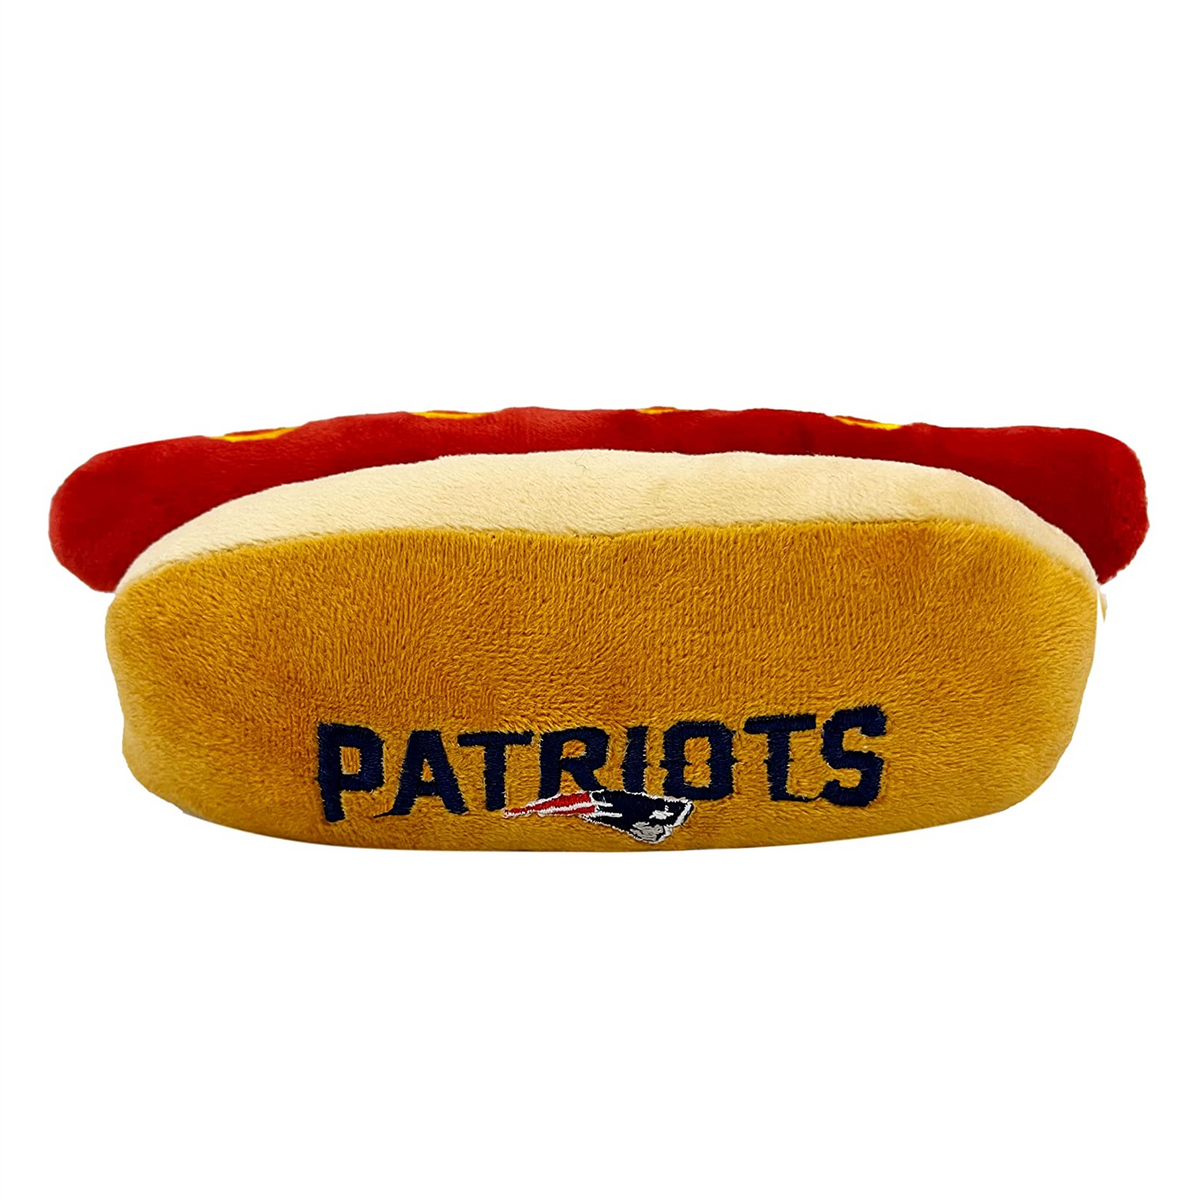 New England Patriots Hot Dog Plush Toys - 3 Red Rovers